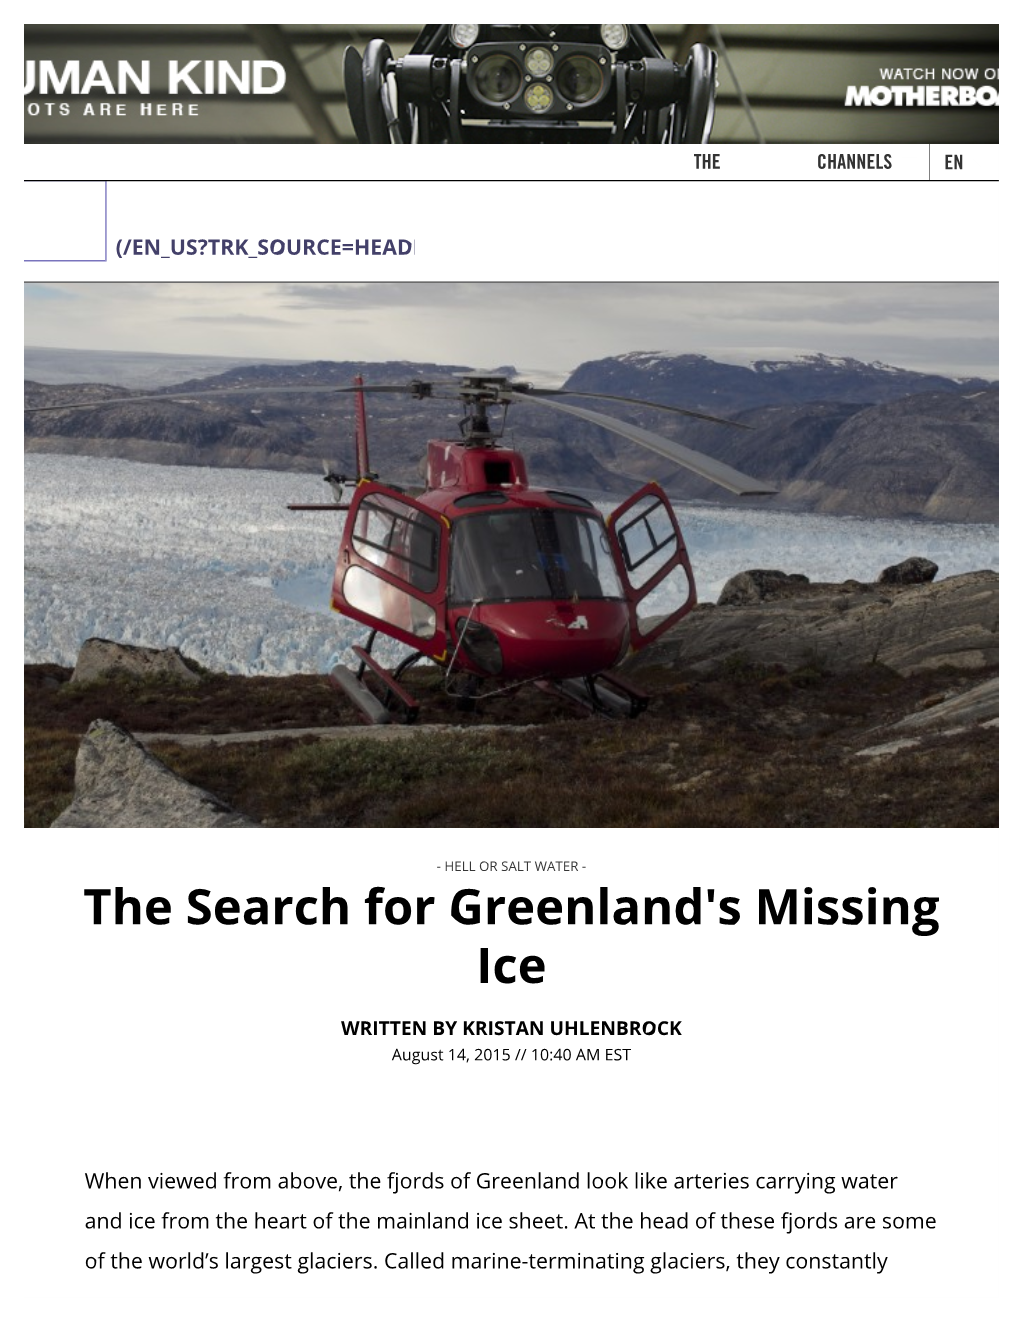 The Search for Greenland's Missing Ice